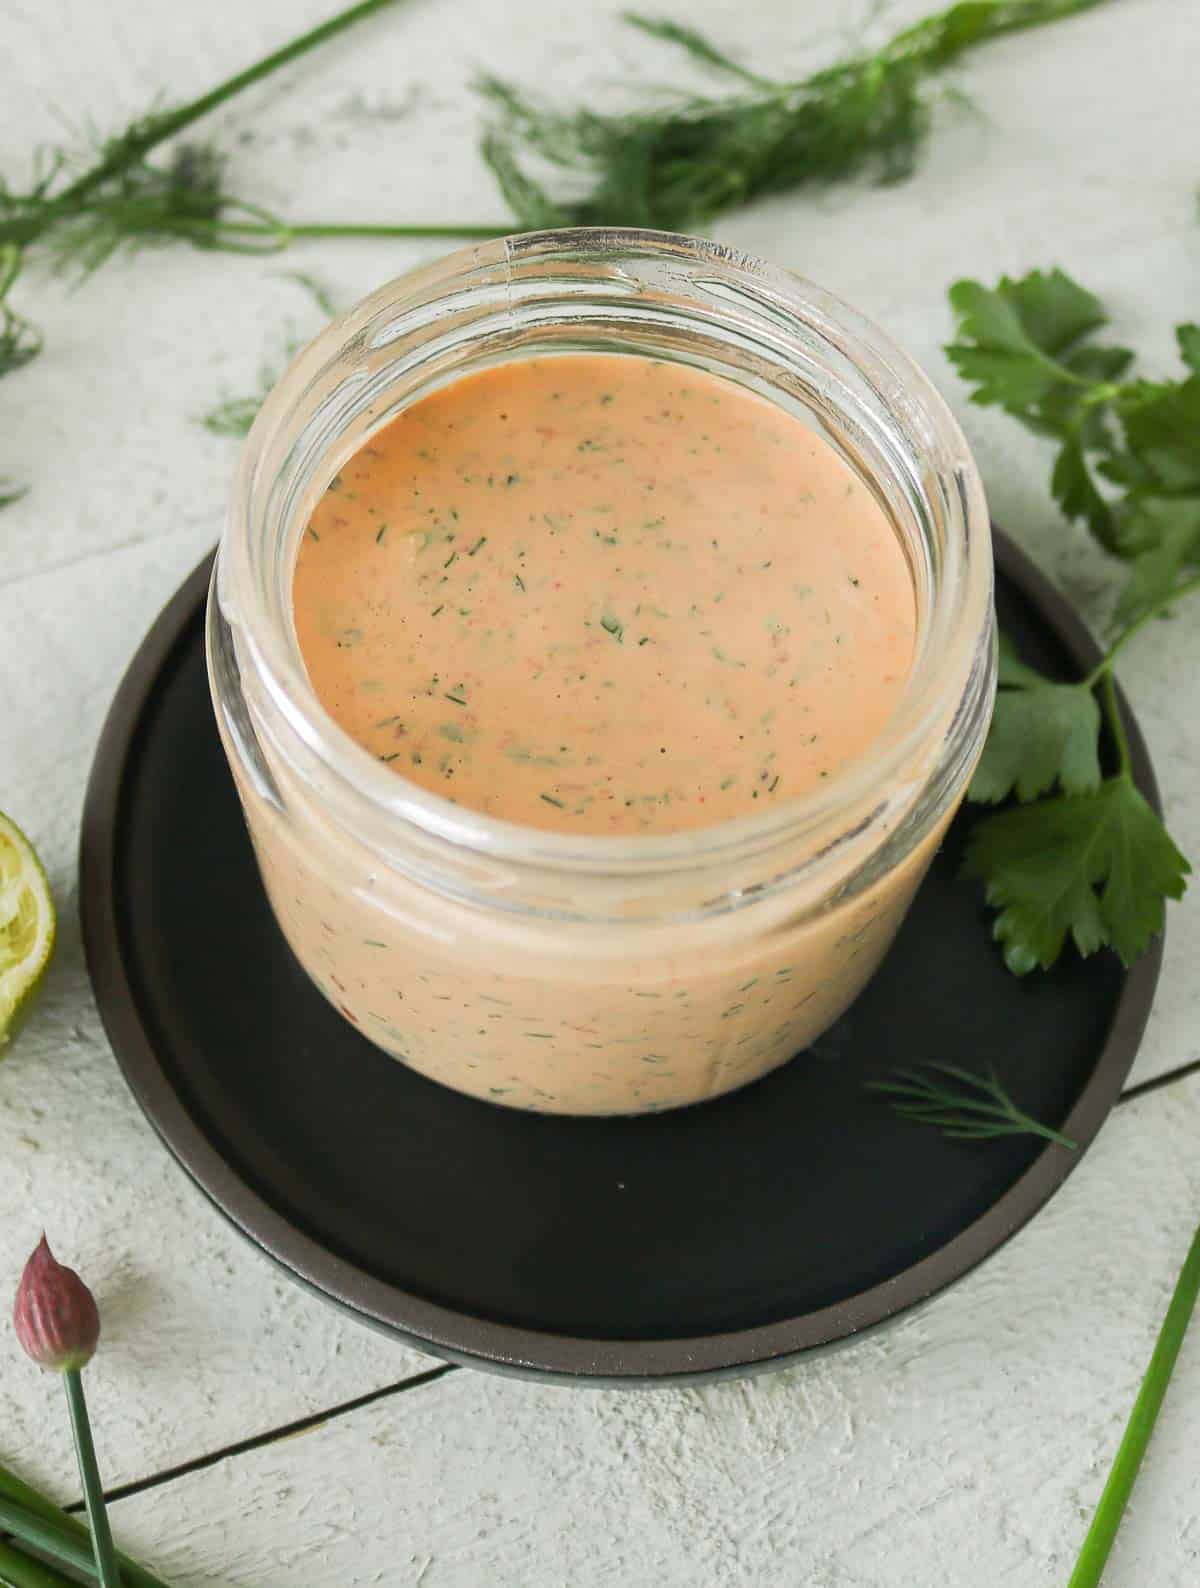 Jar of chipotle ranch dressing.